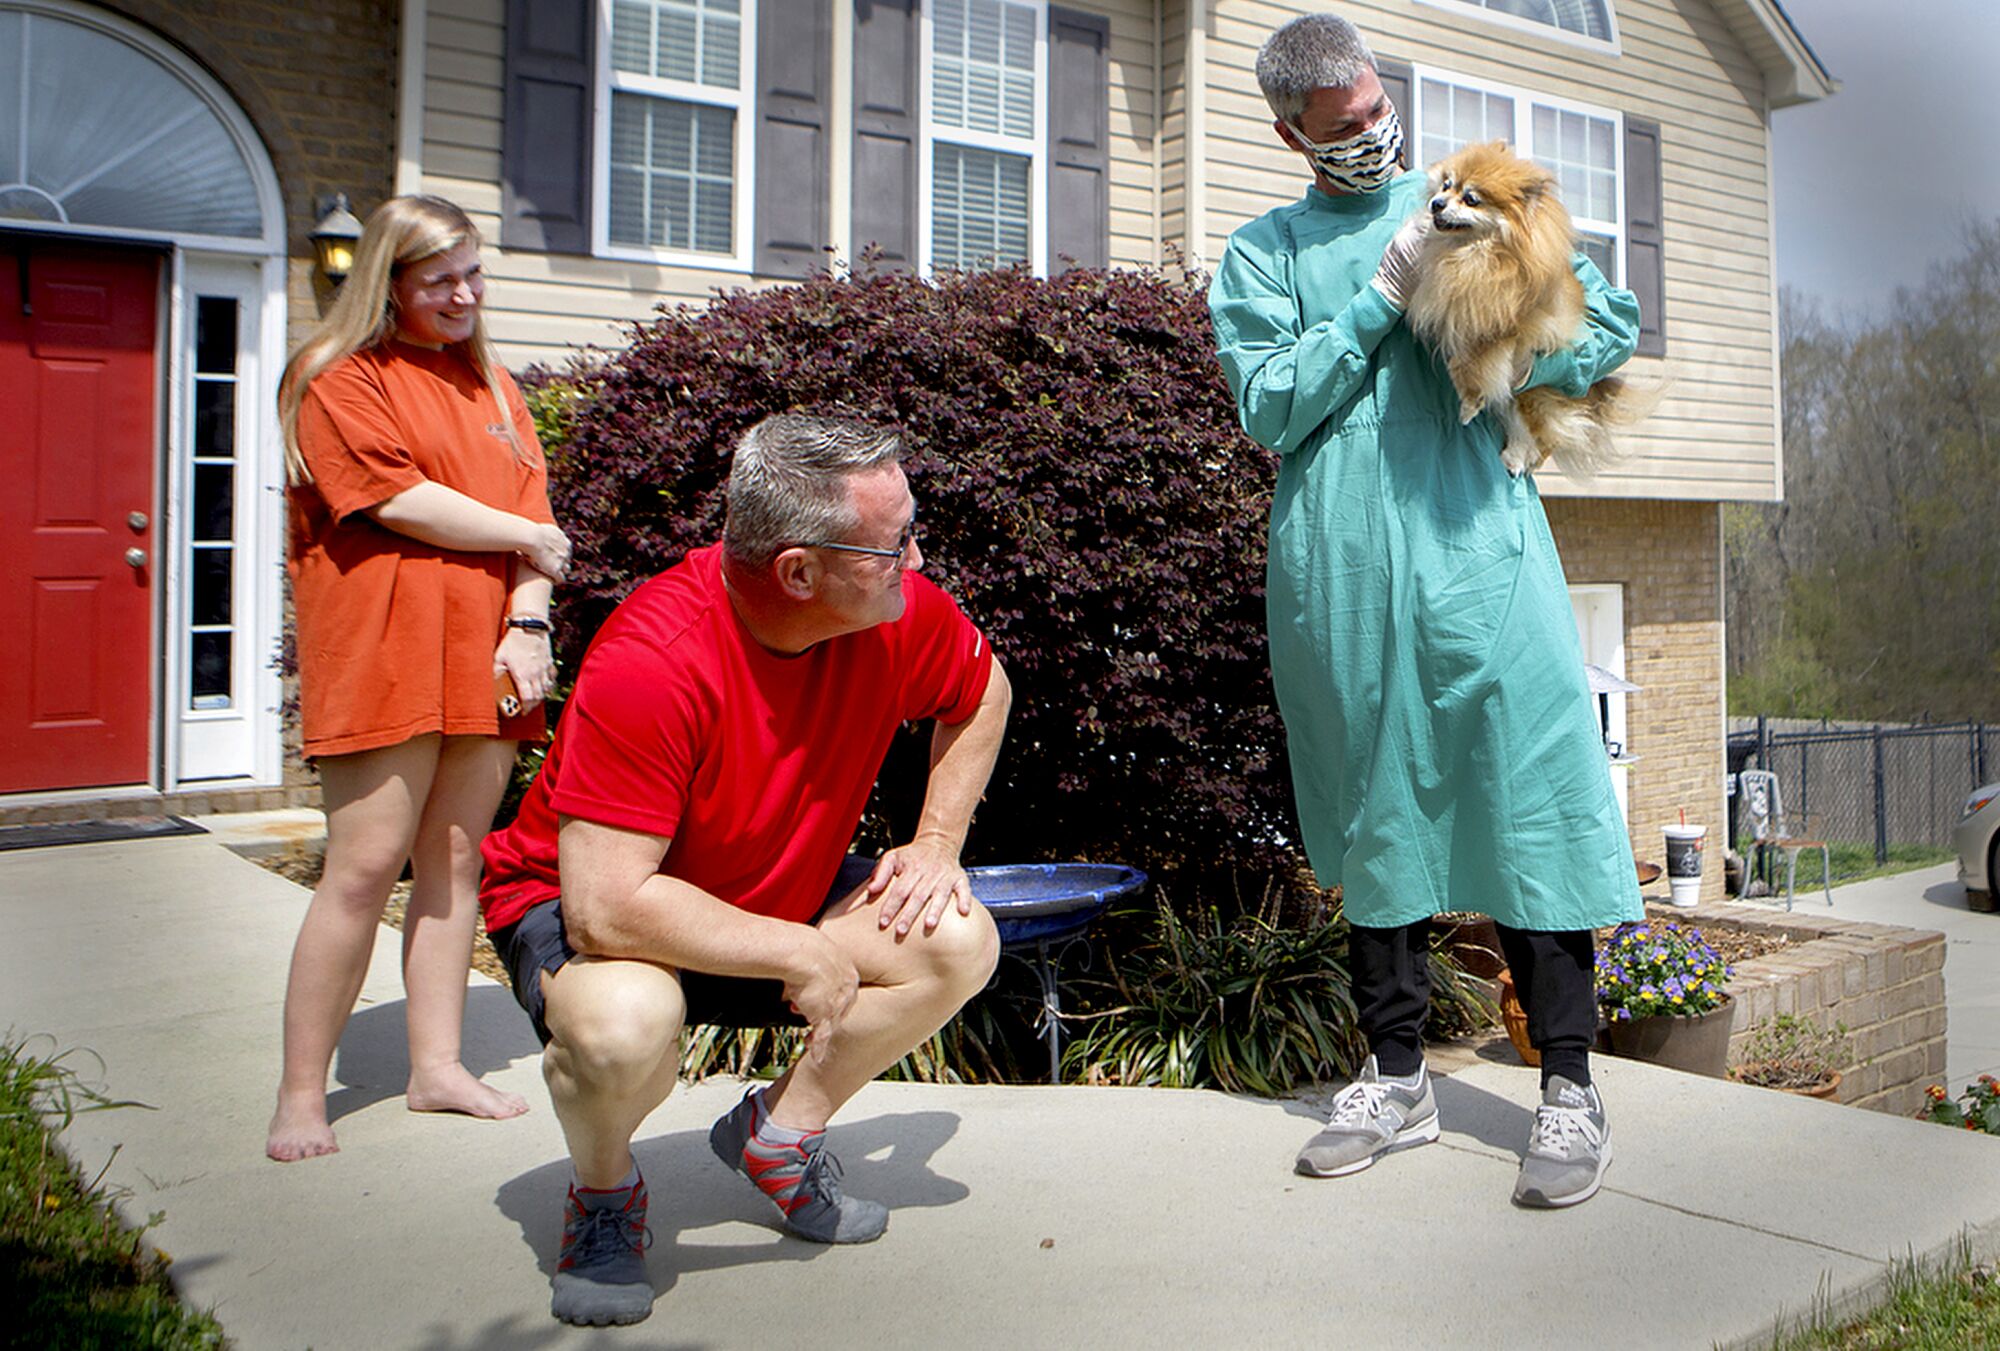 U.S.: Ooltewah Veterinary Hospital Dr. Micah Woods holds Izzy as owners Ken, center, and Zoe Leslie look on at the Leslies' home March 27 in Ooltewah, Tenn. Because of the coronavirus outbreak, Ooltewah Veterinary Hospital began to offer house calls for clients who are unable to leave their homes.